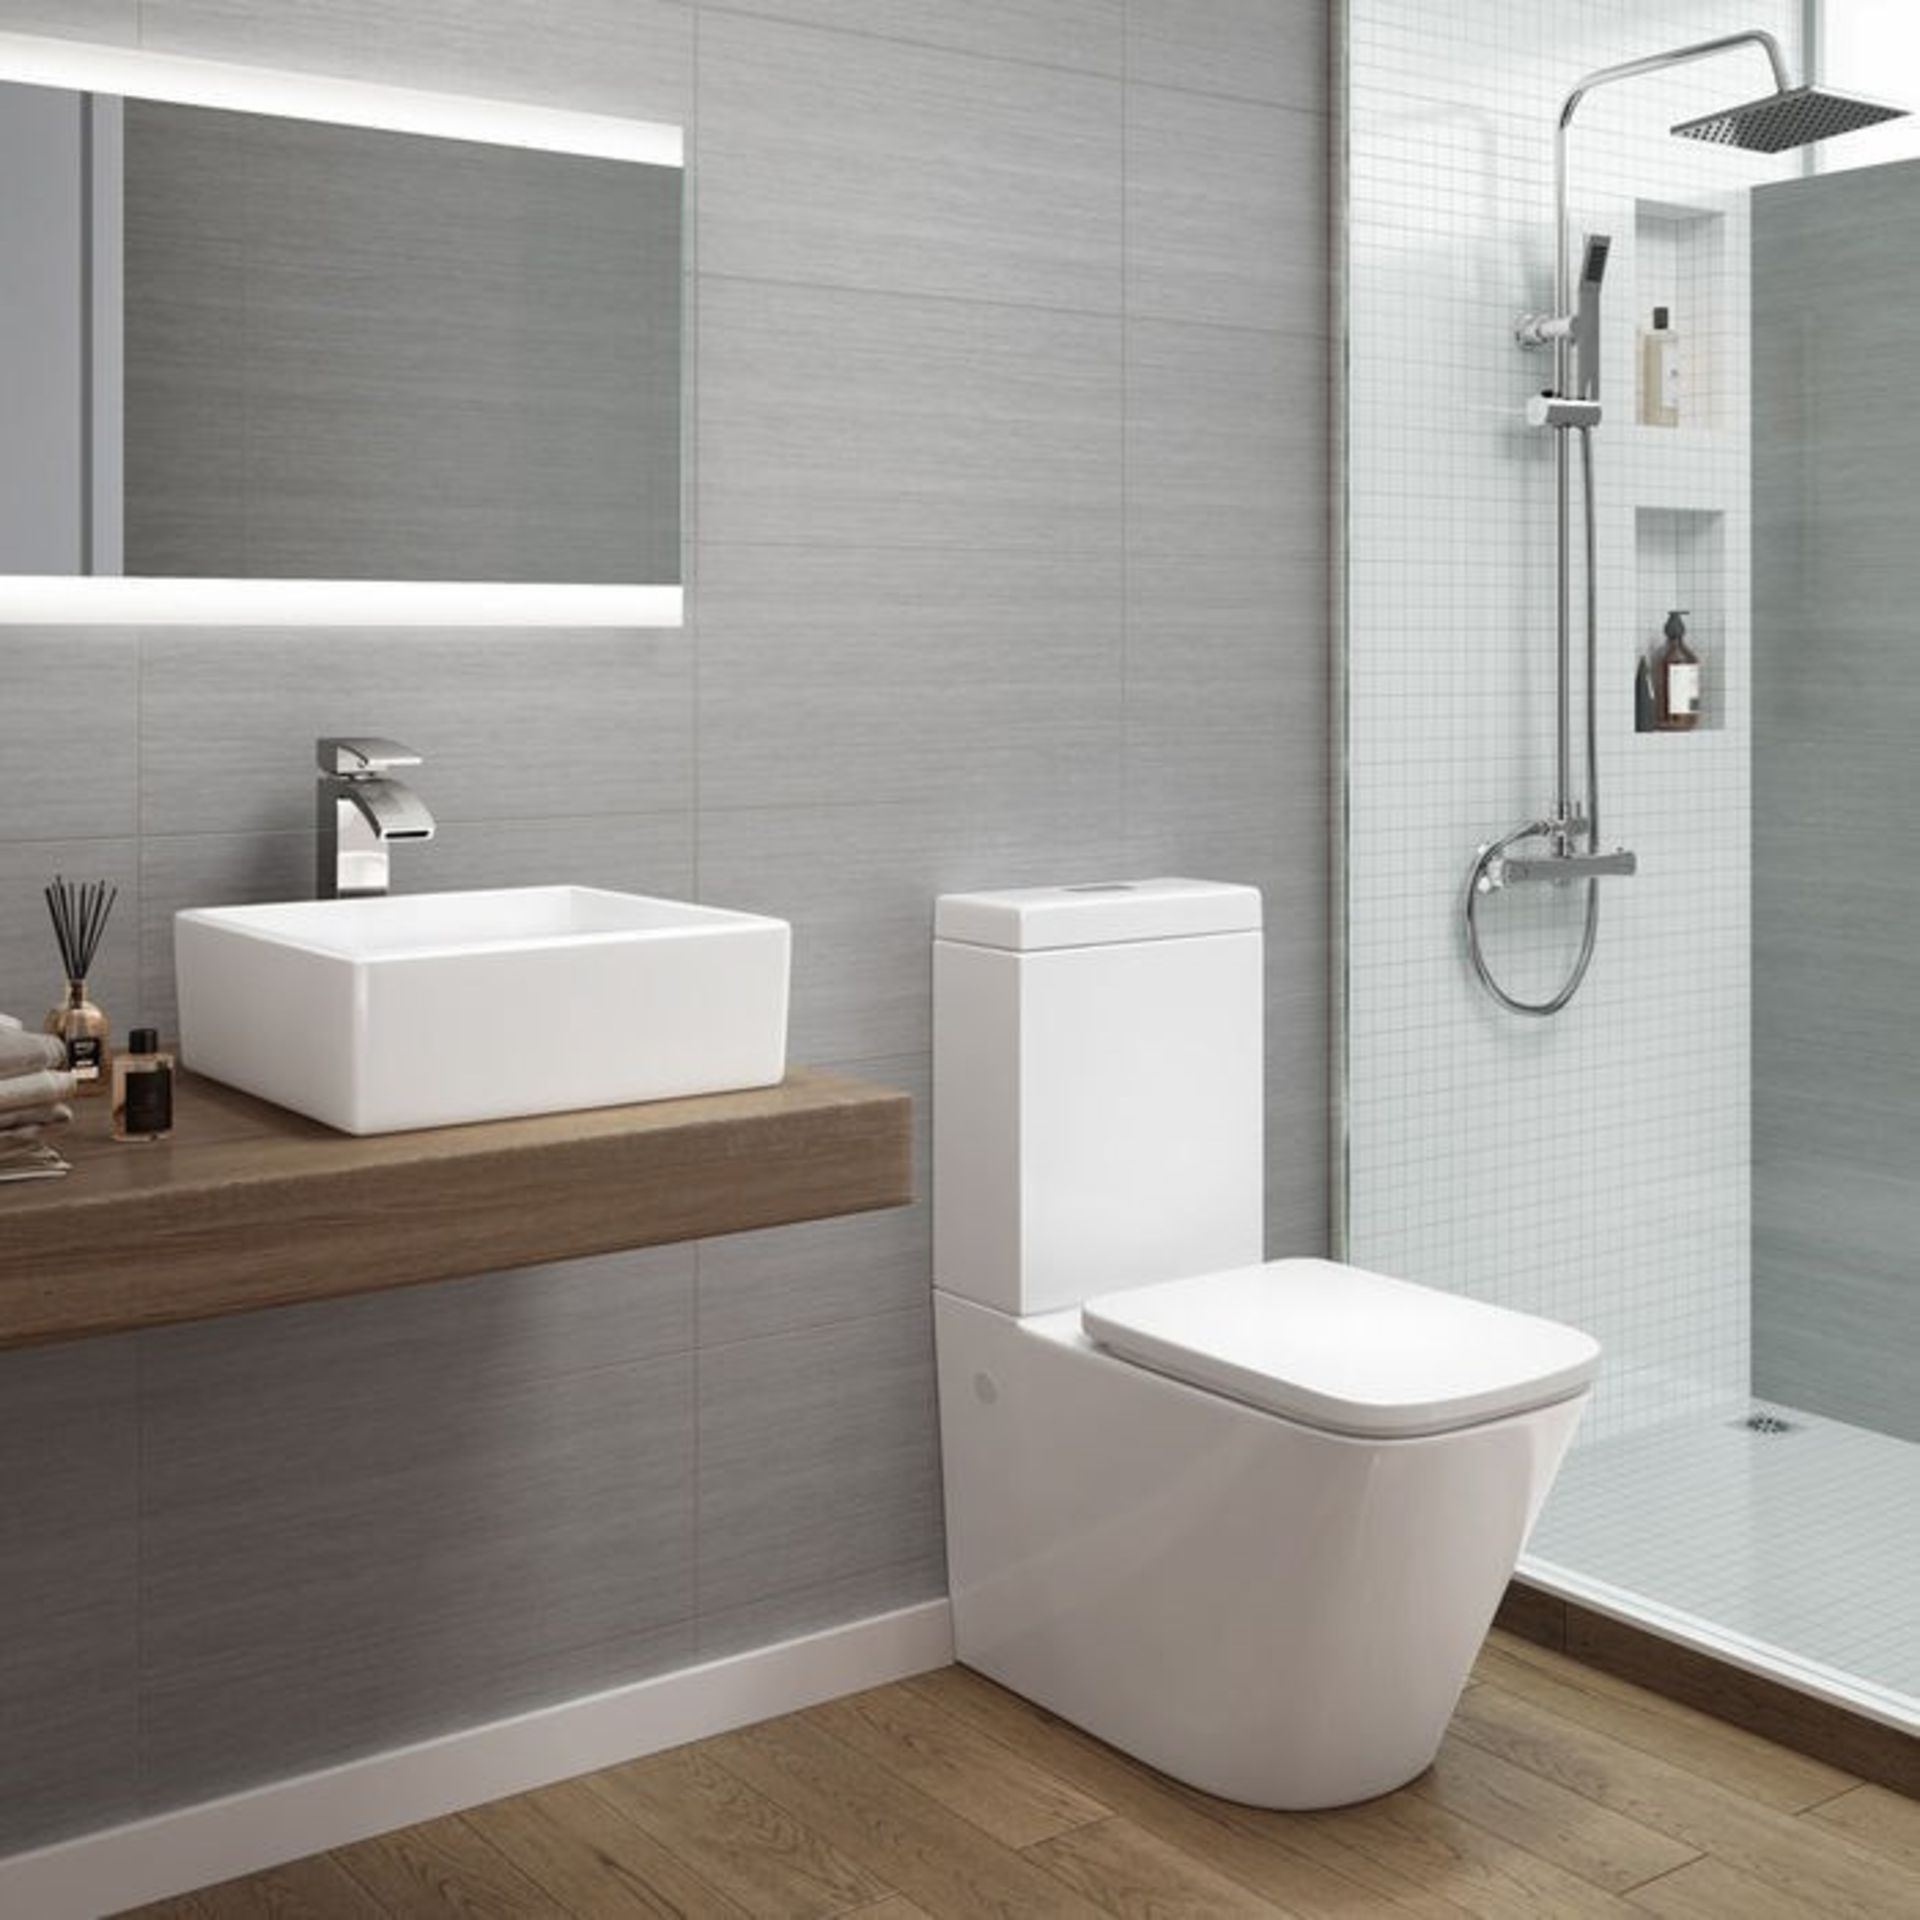 Florence Close Coupled Toilet & Cistern inc Soft Close Seat. Contemporary design finished... - Image 2 of 3